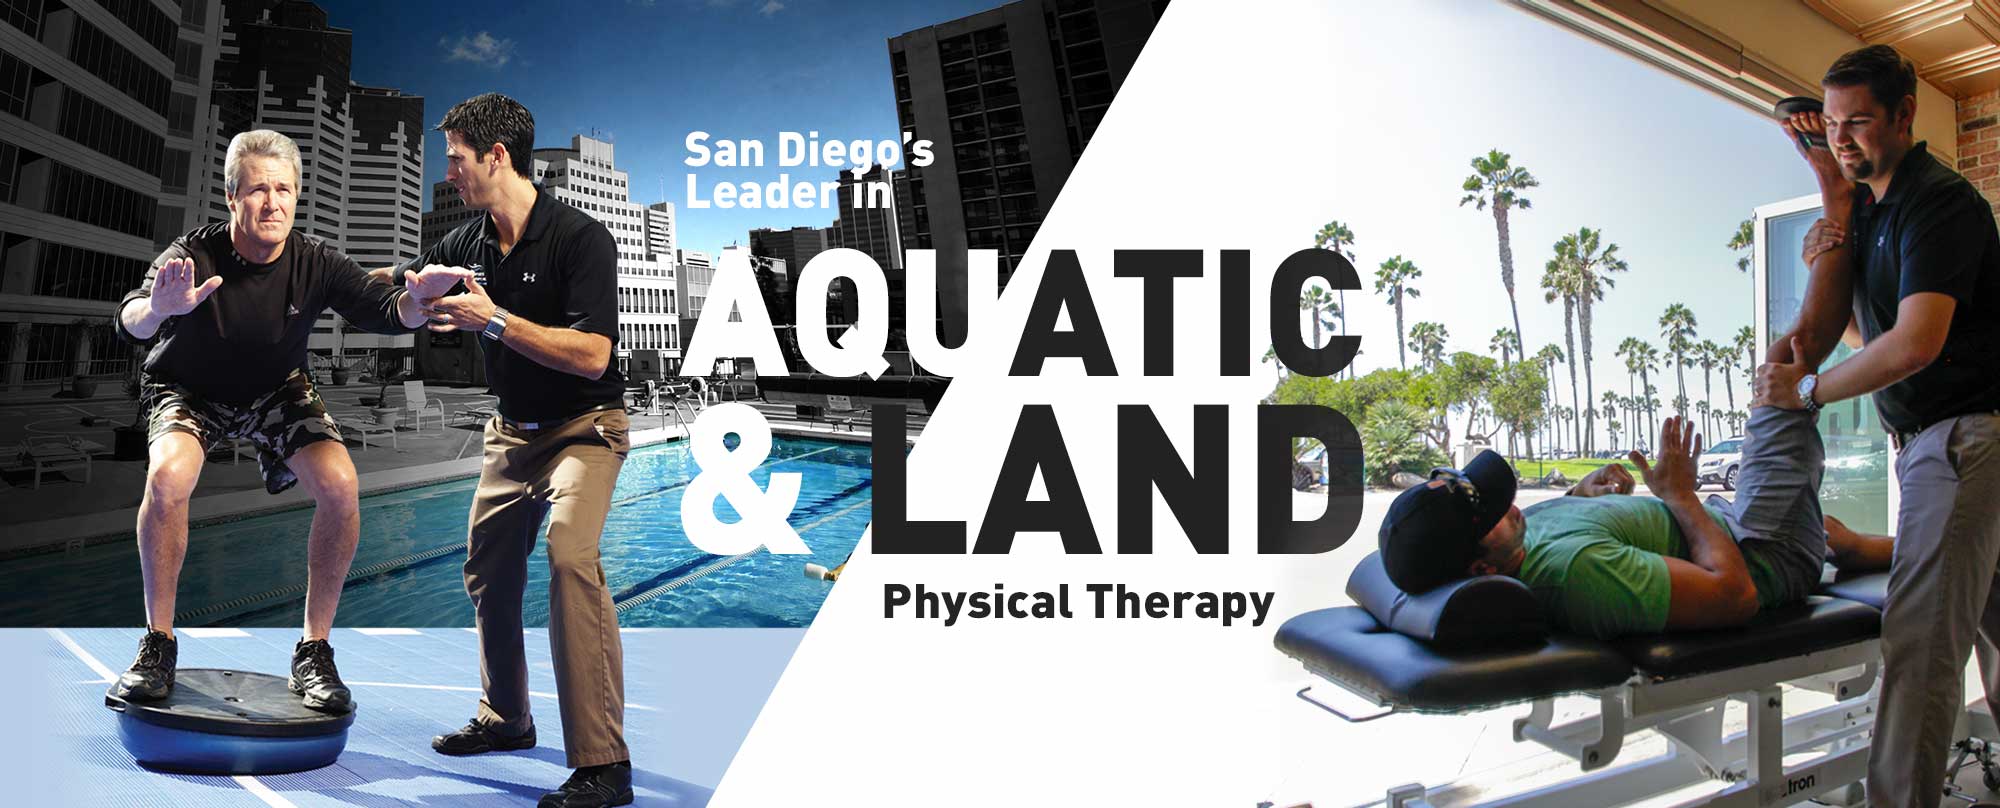 Water Sports Physical Therapy San Diego Physical Therapy